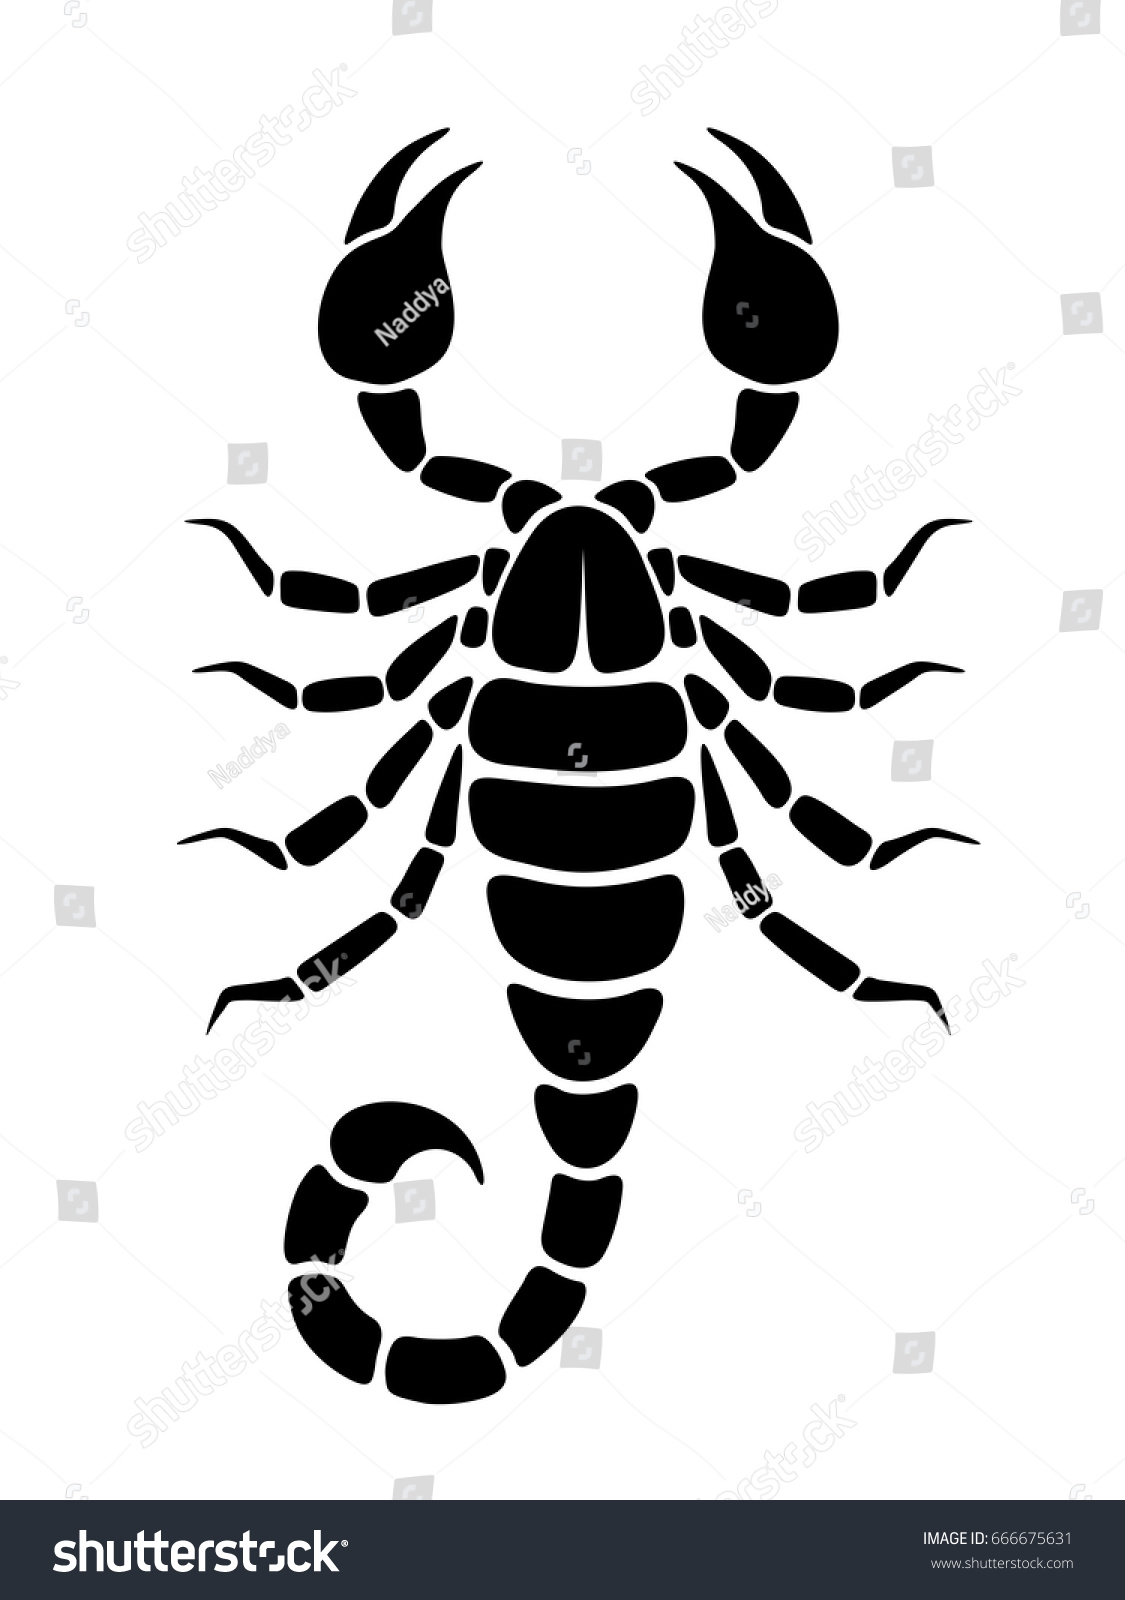 Vector Black Silhouette Scorpio Isolated On Stock Vector (Royalty Free ...